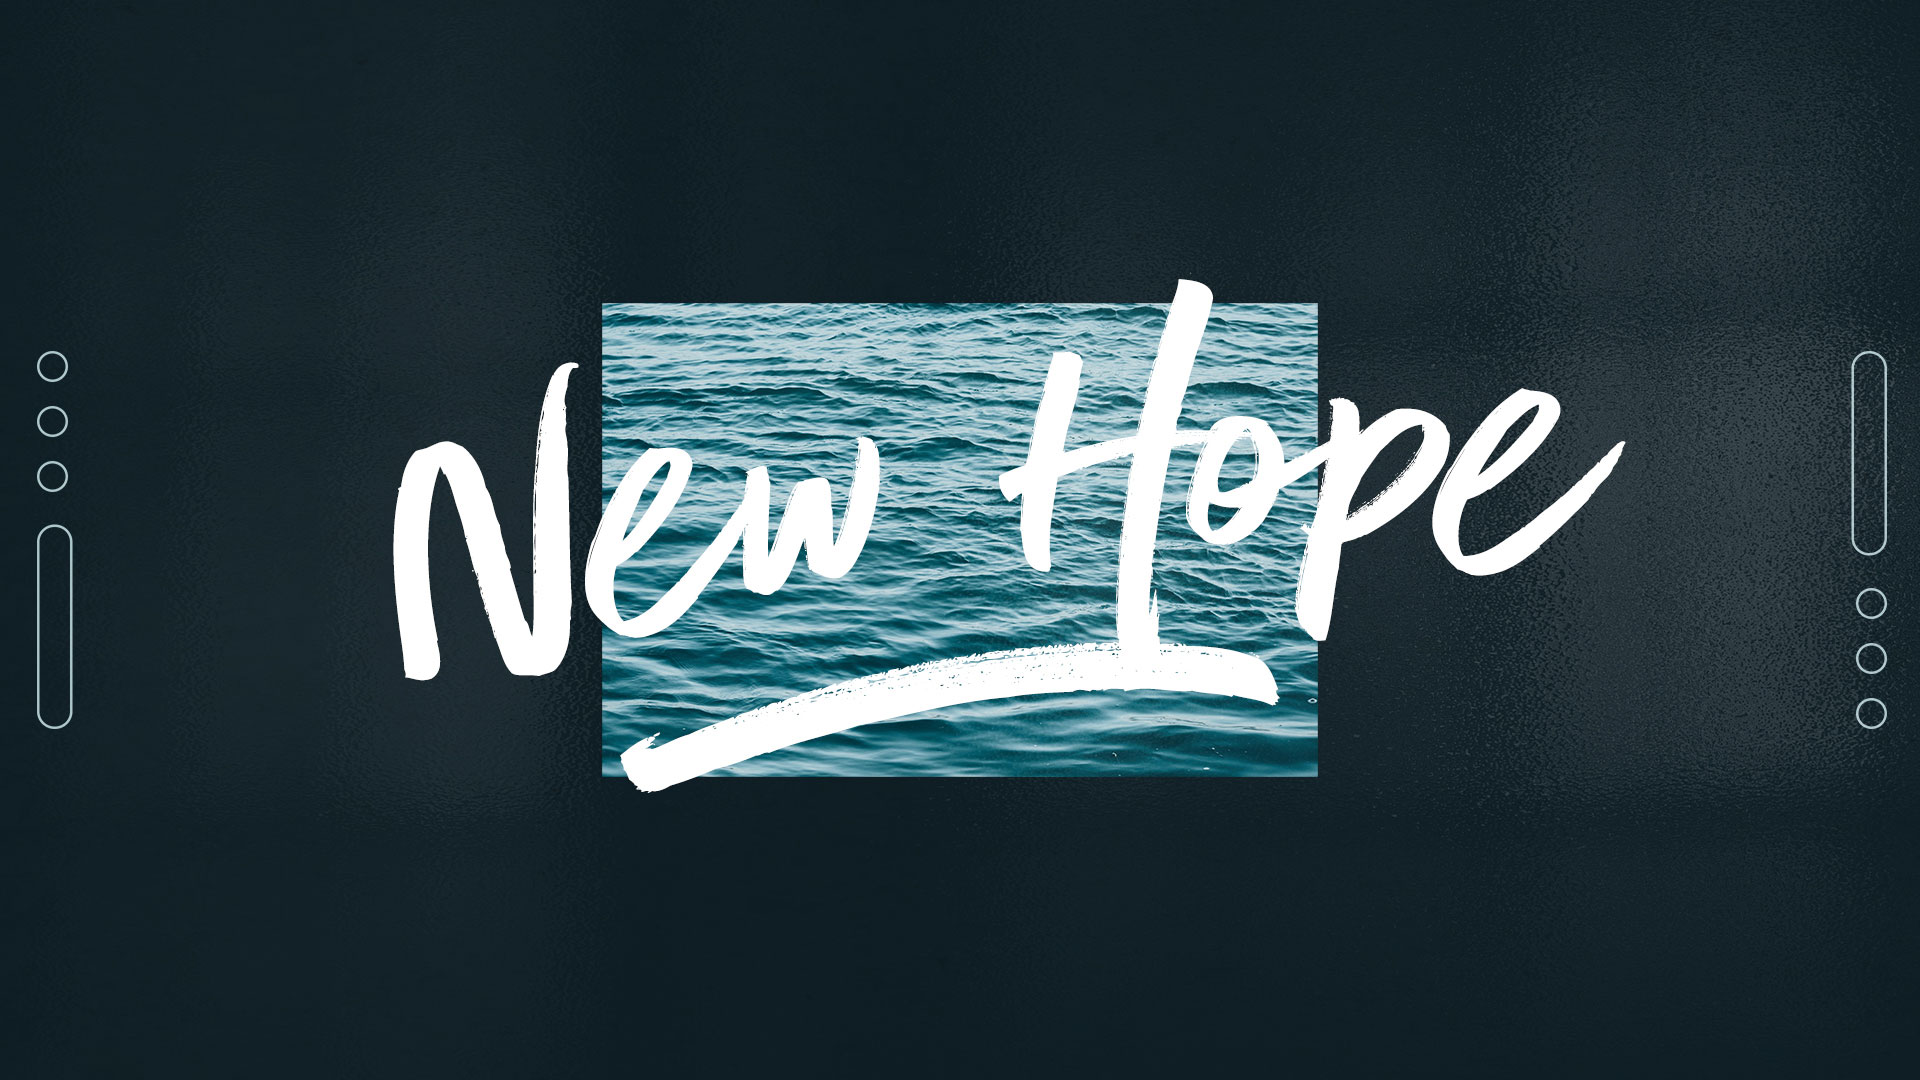 "New Hope" Message